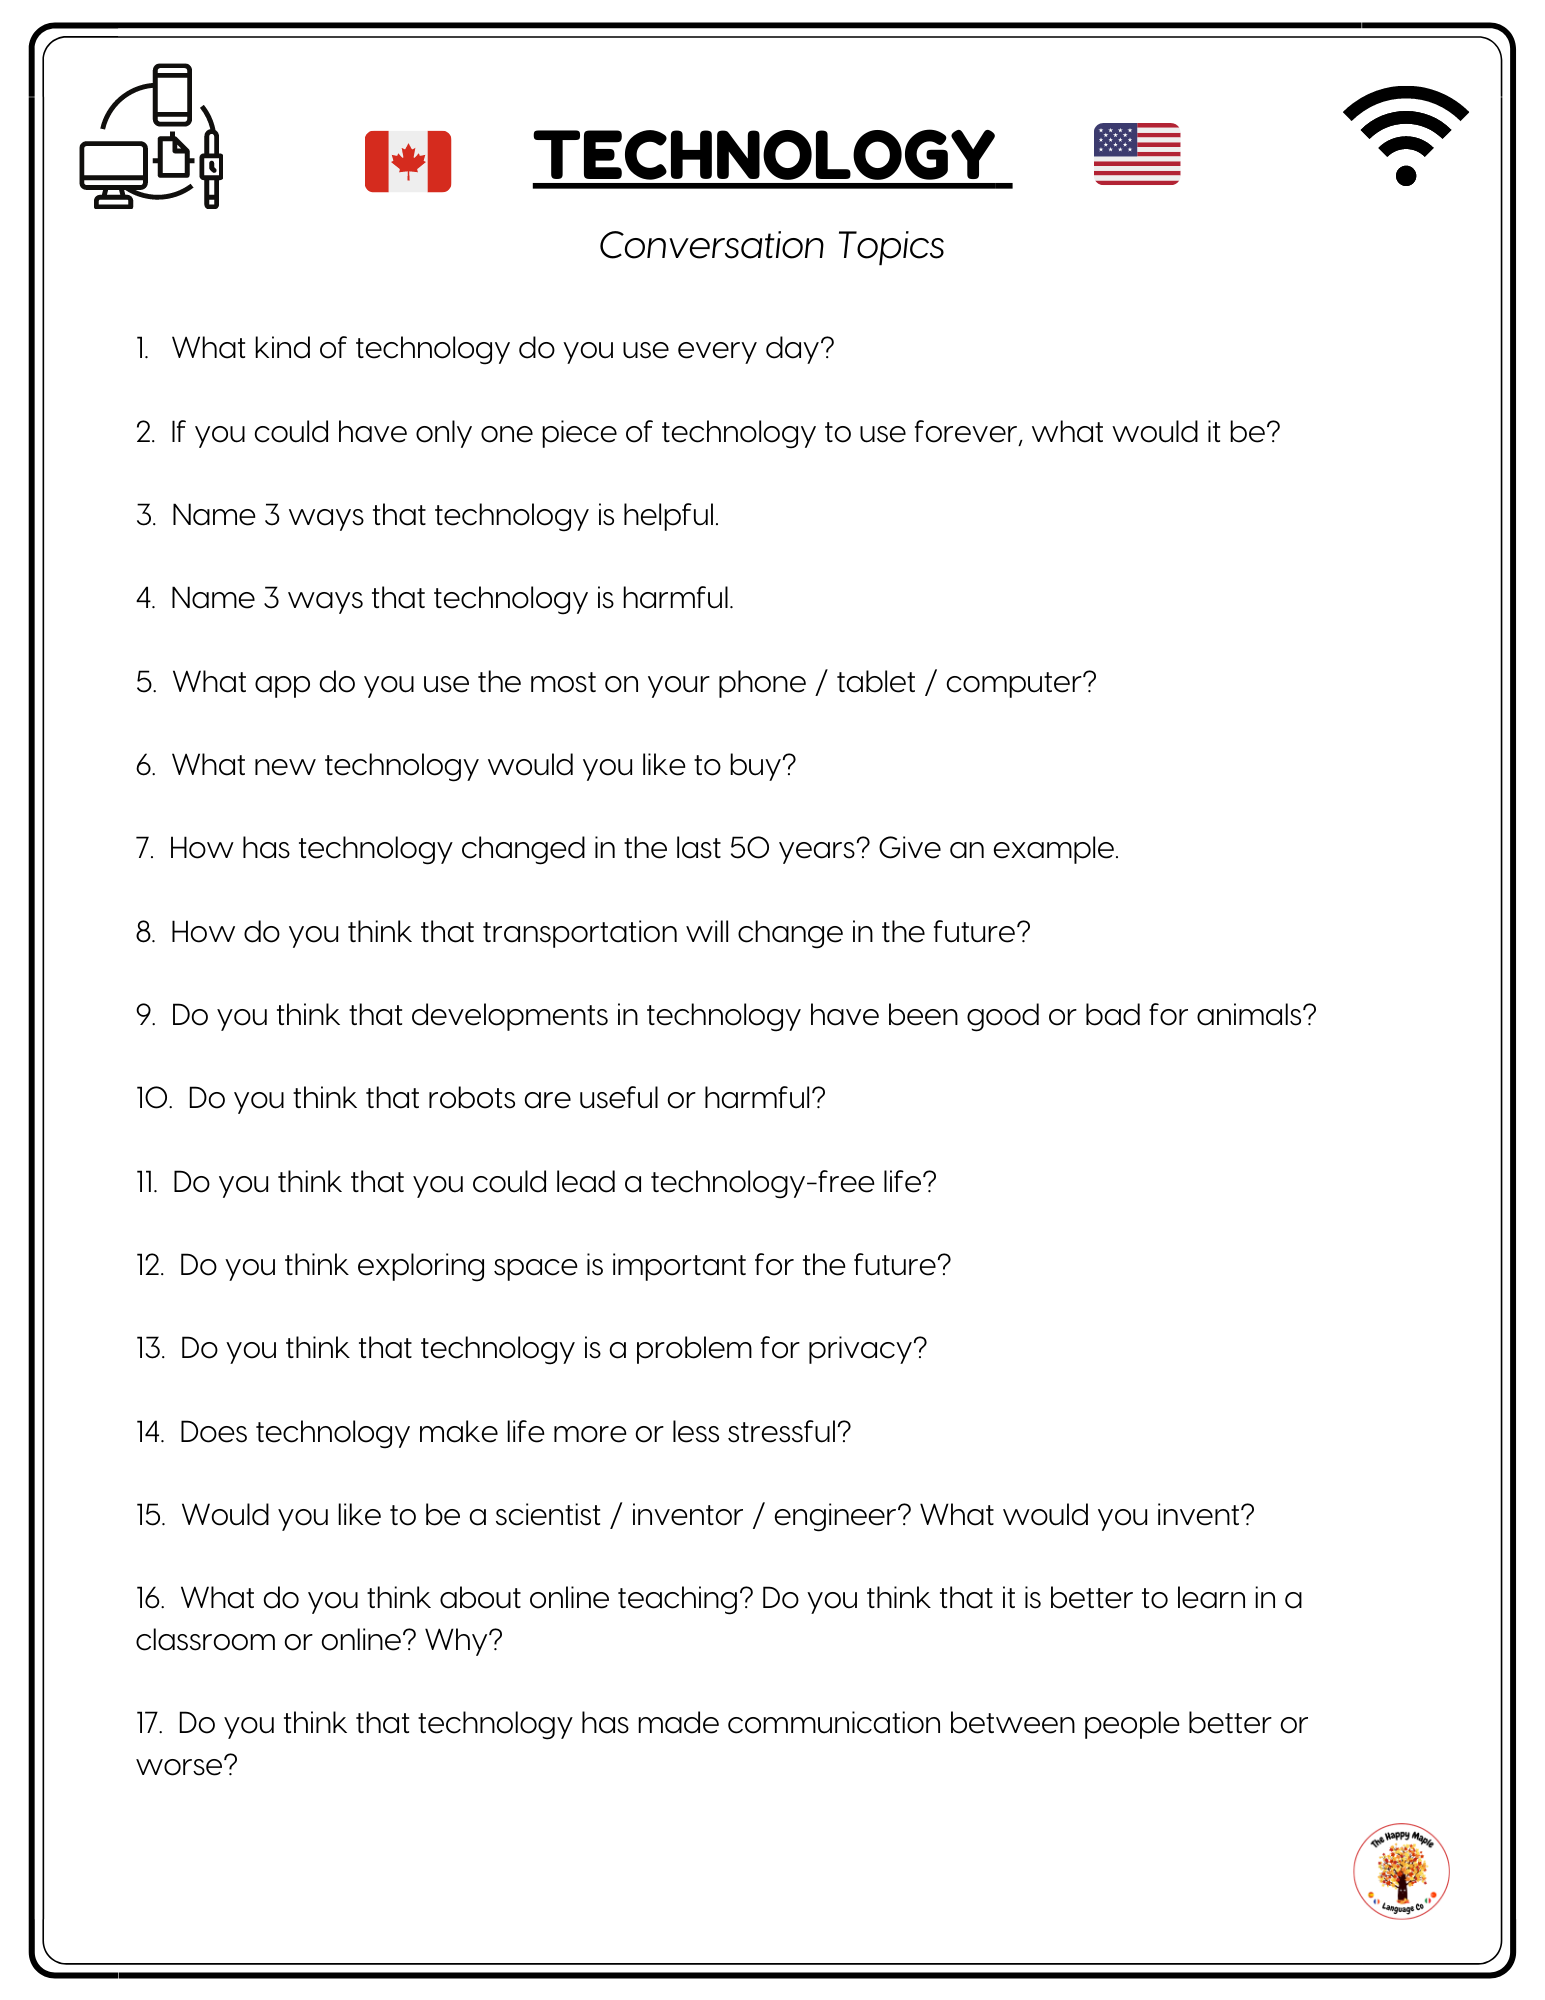 ESL EFL discussion questions about technology Free printable PDF download